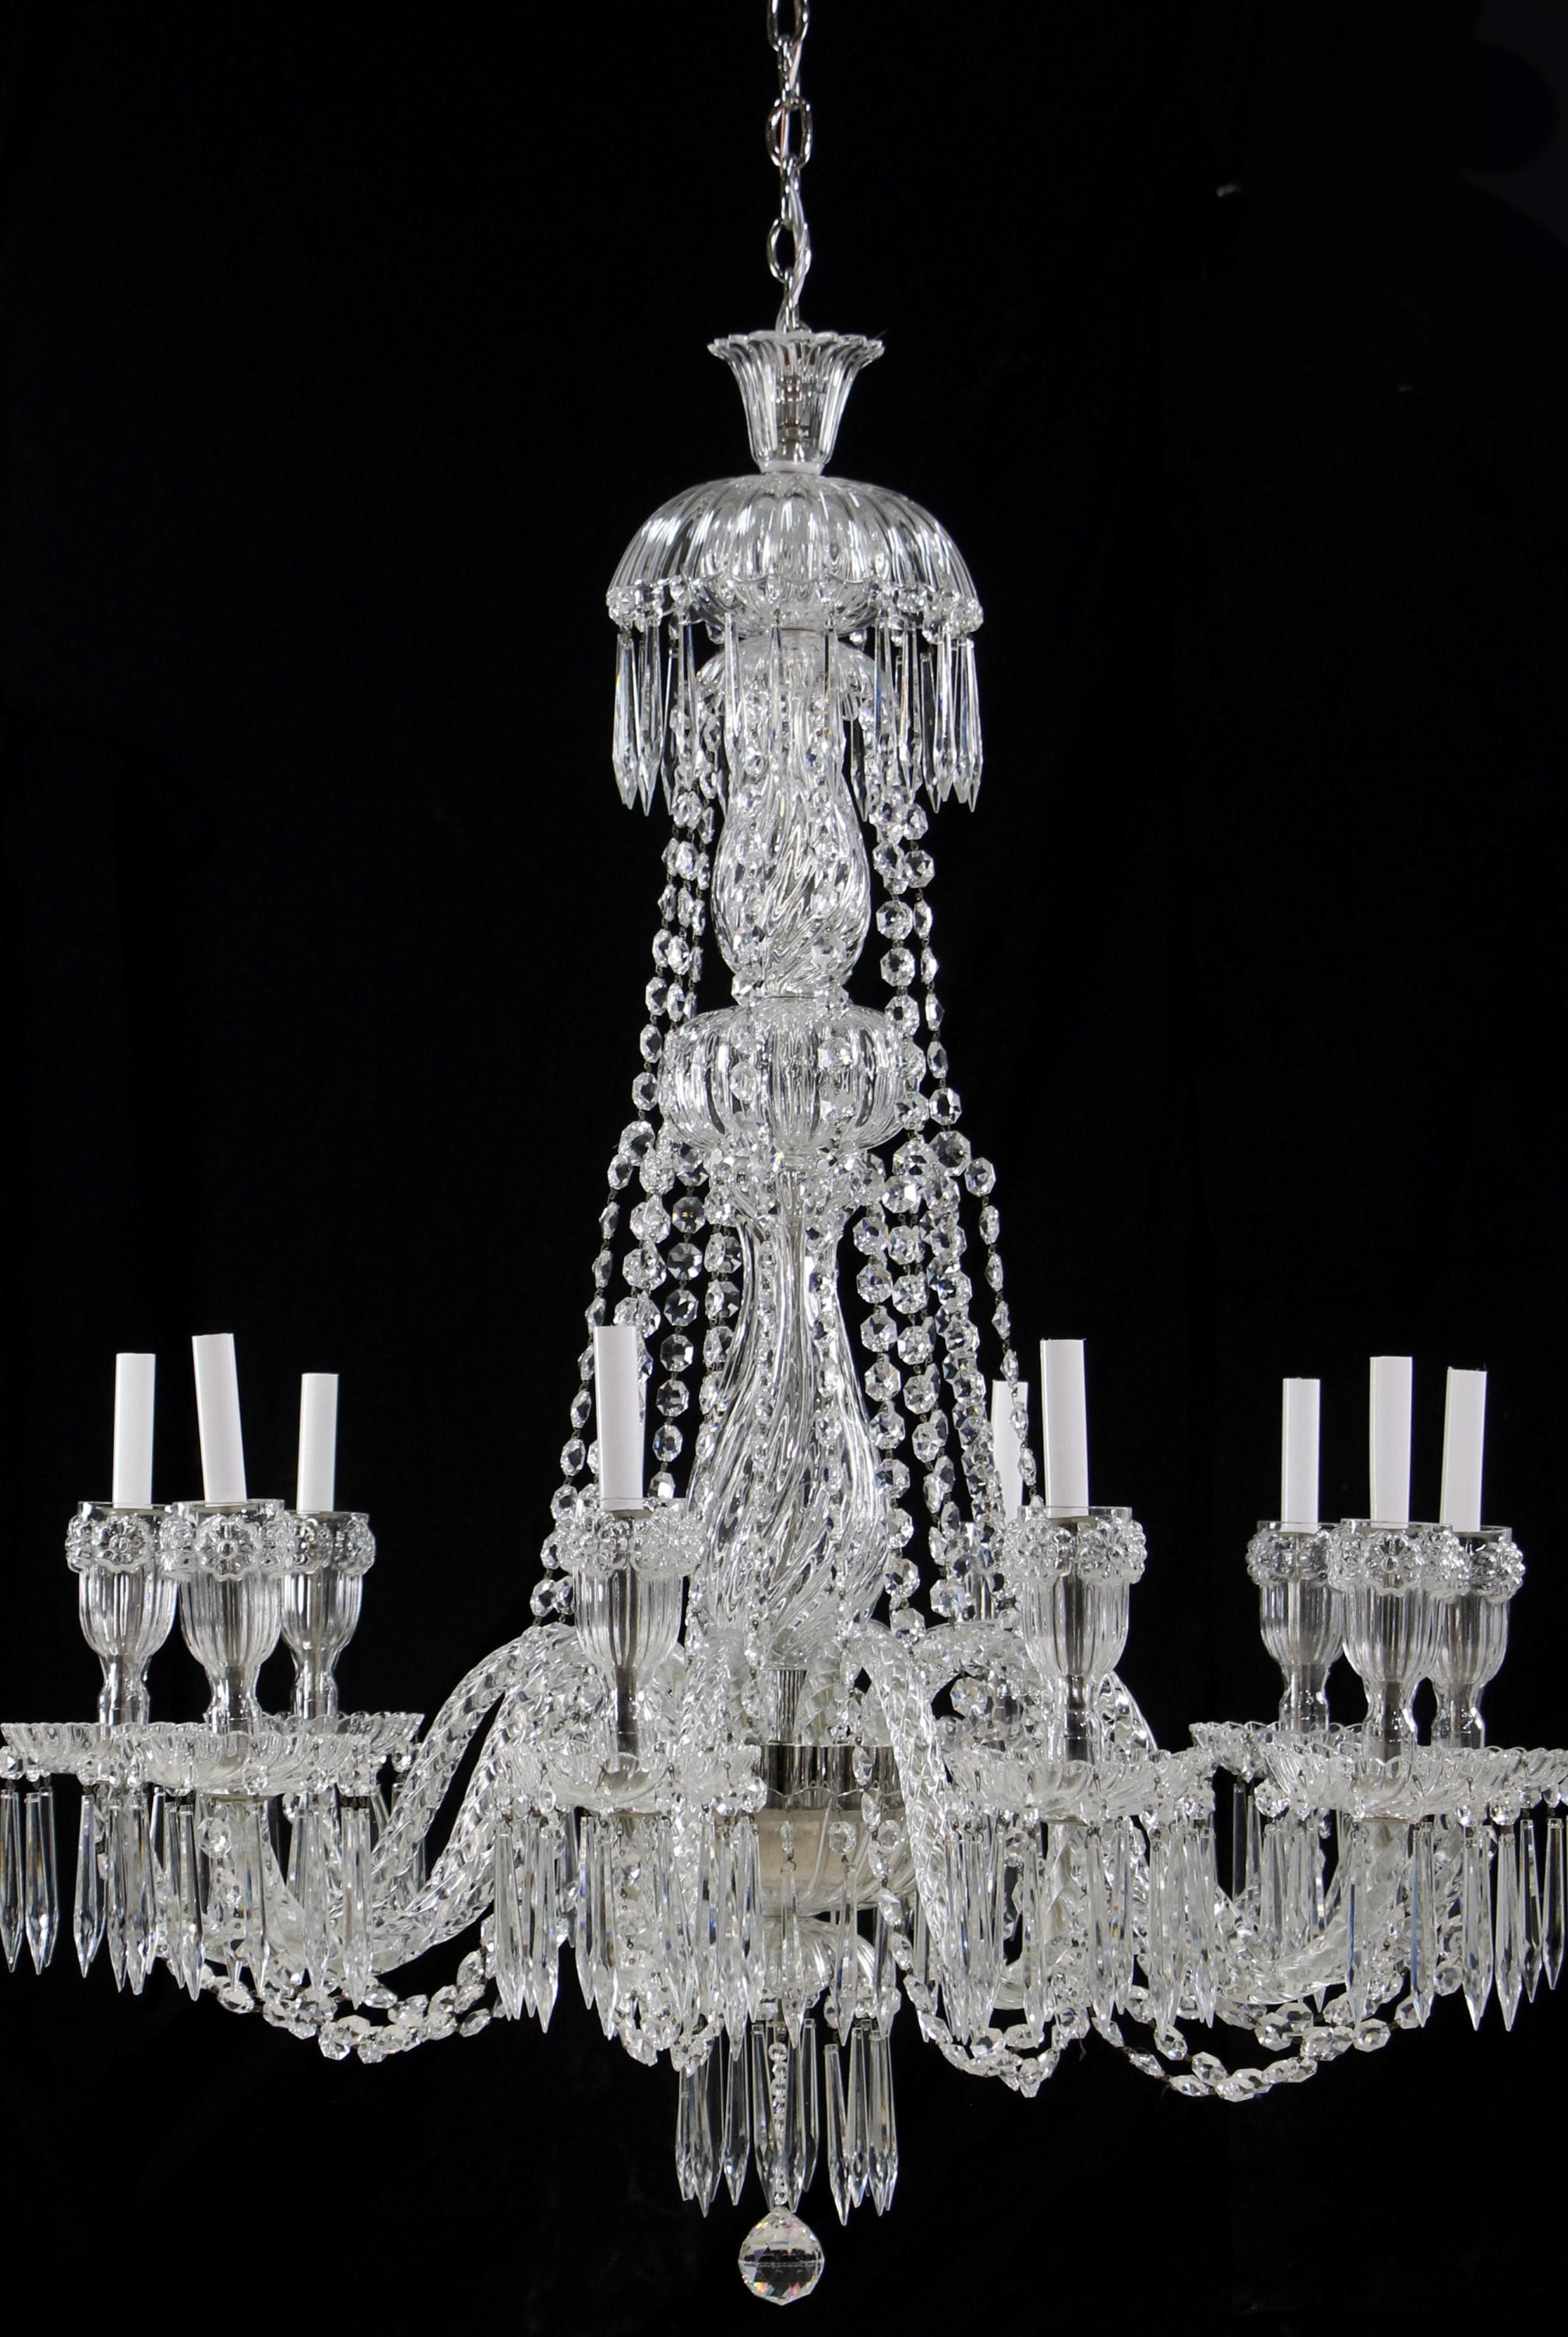 Victorian Heavily Draped Crystal Chandelier 12 Light Braided Arms For Sale